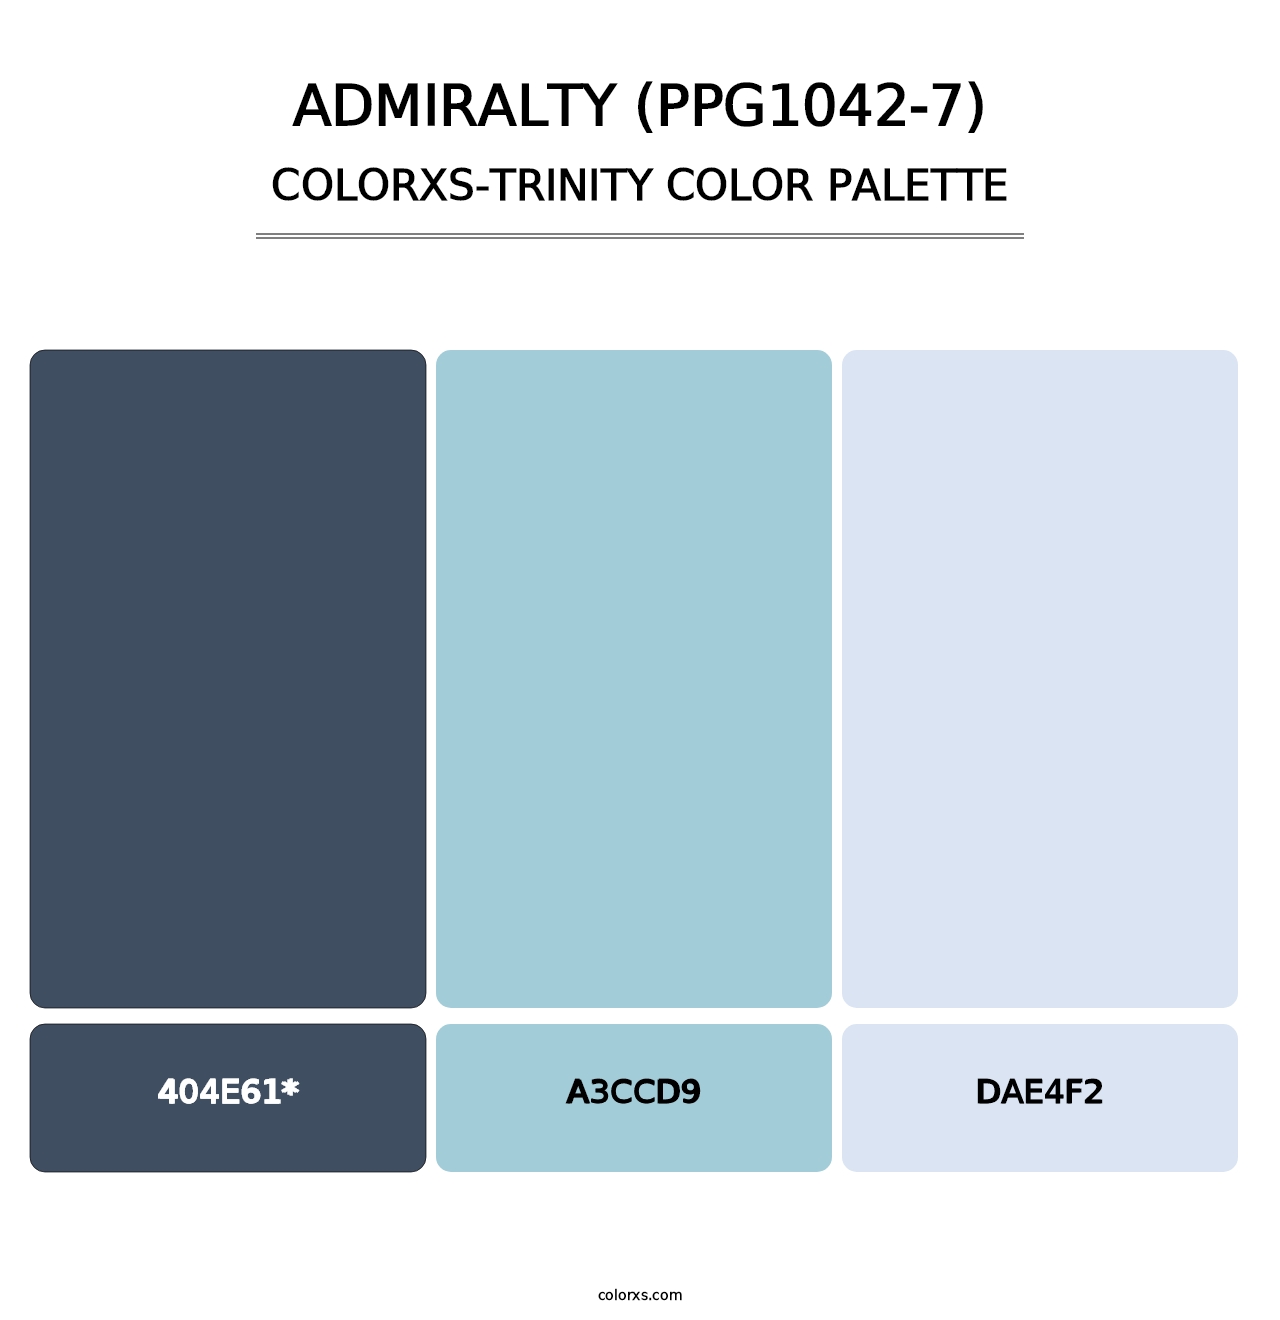 Admiralty (PPG1042-7) - Colorxs Trinity Palette